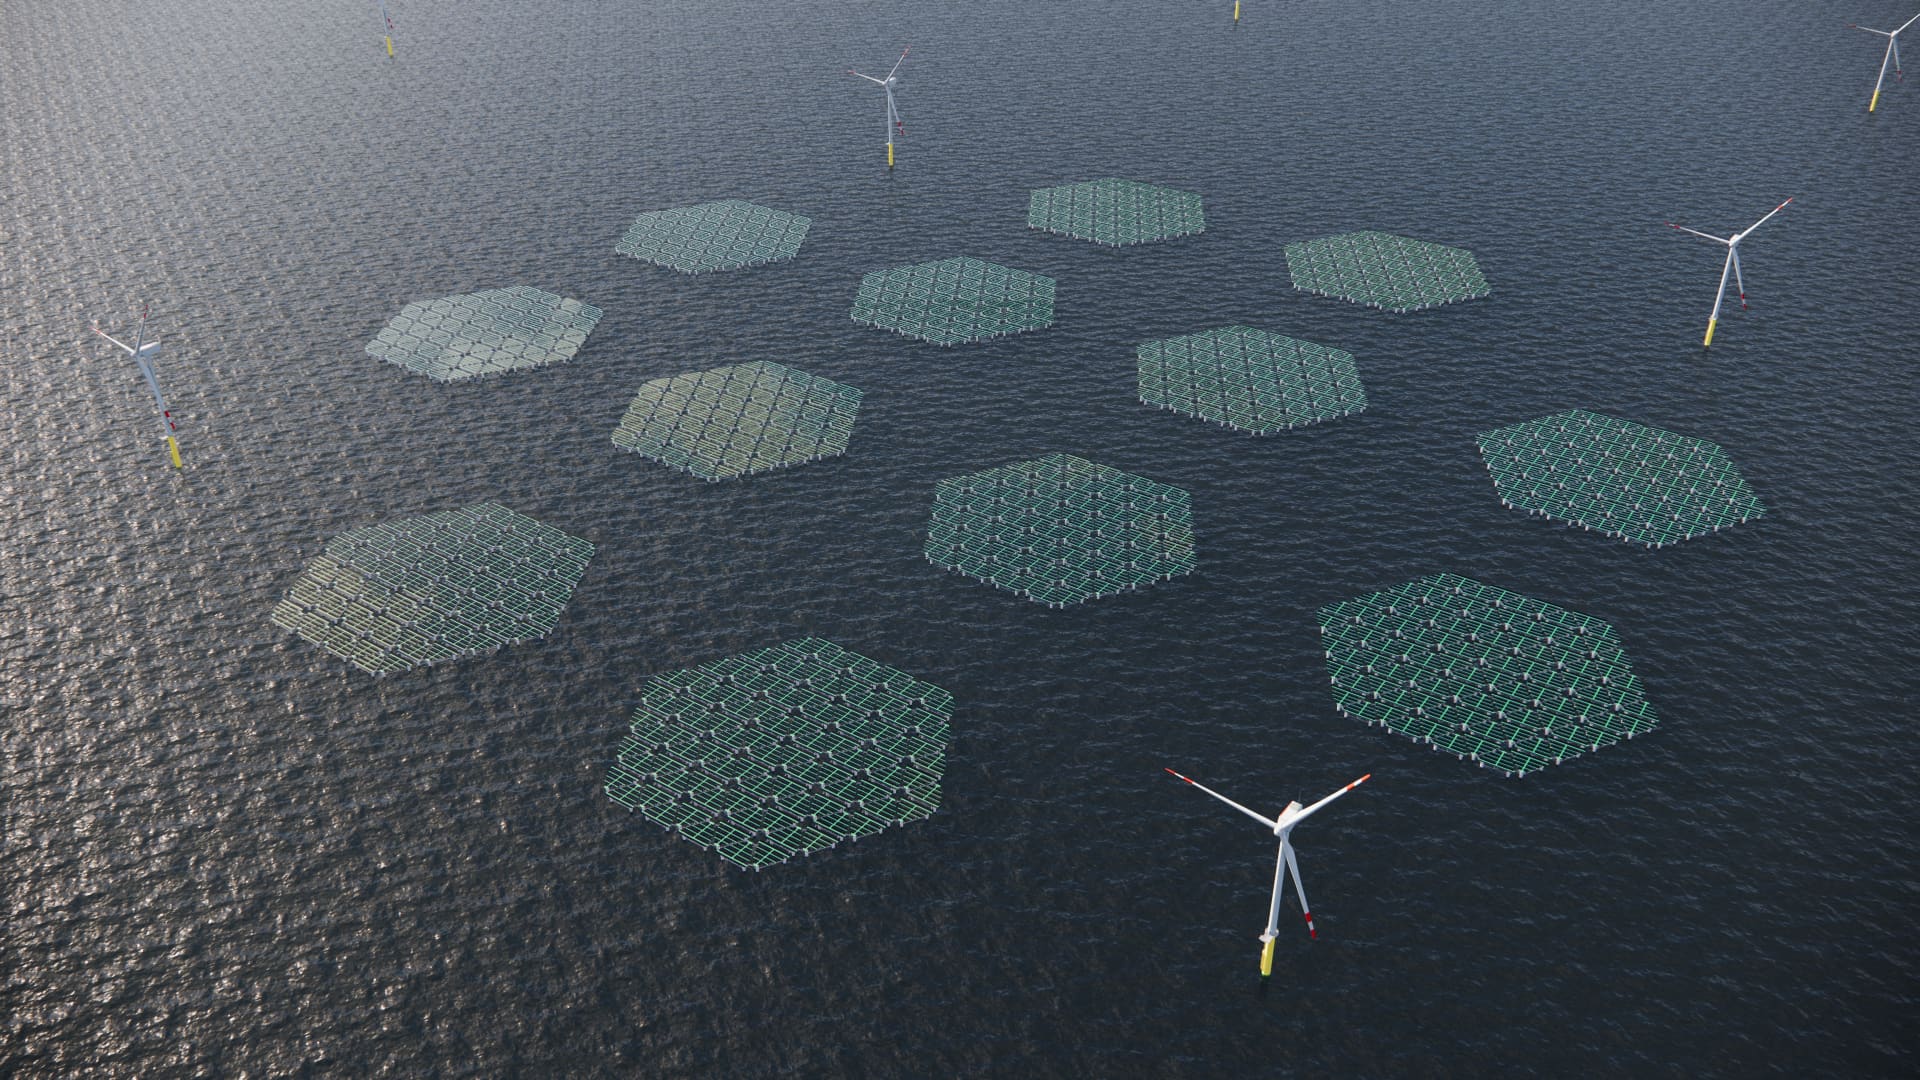 Europe's energy giants explore potential of floating solar